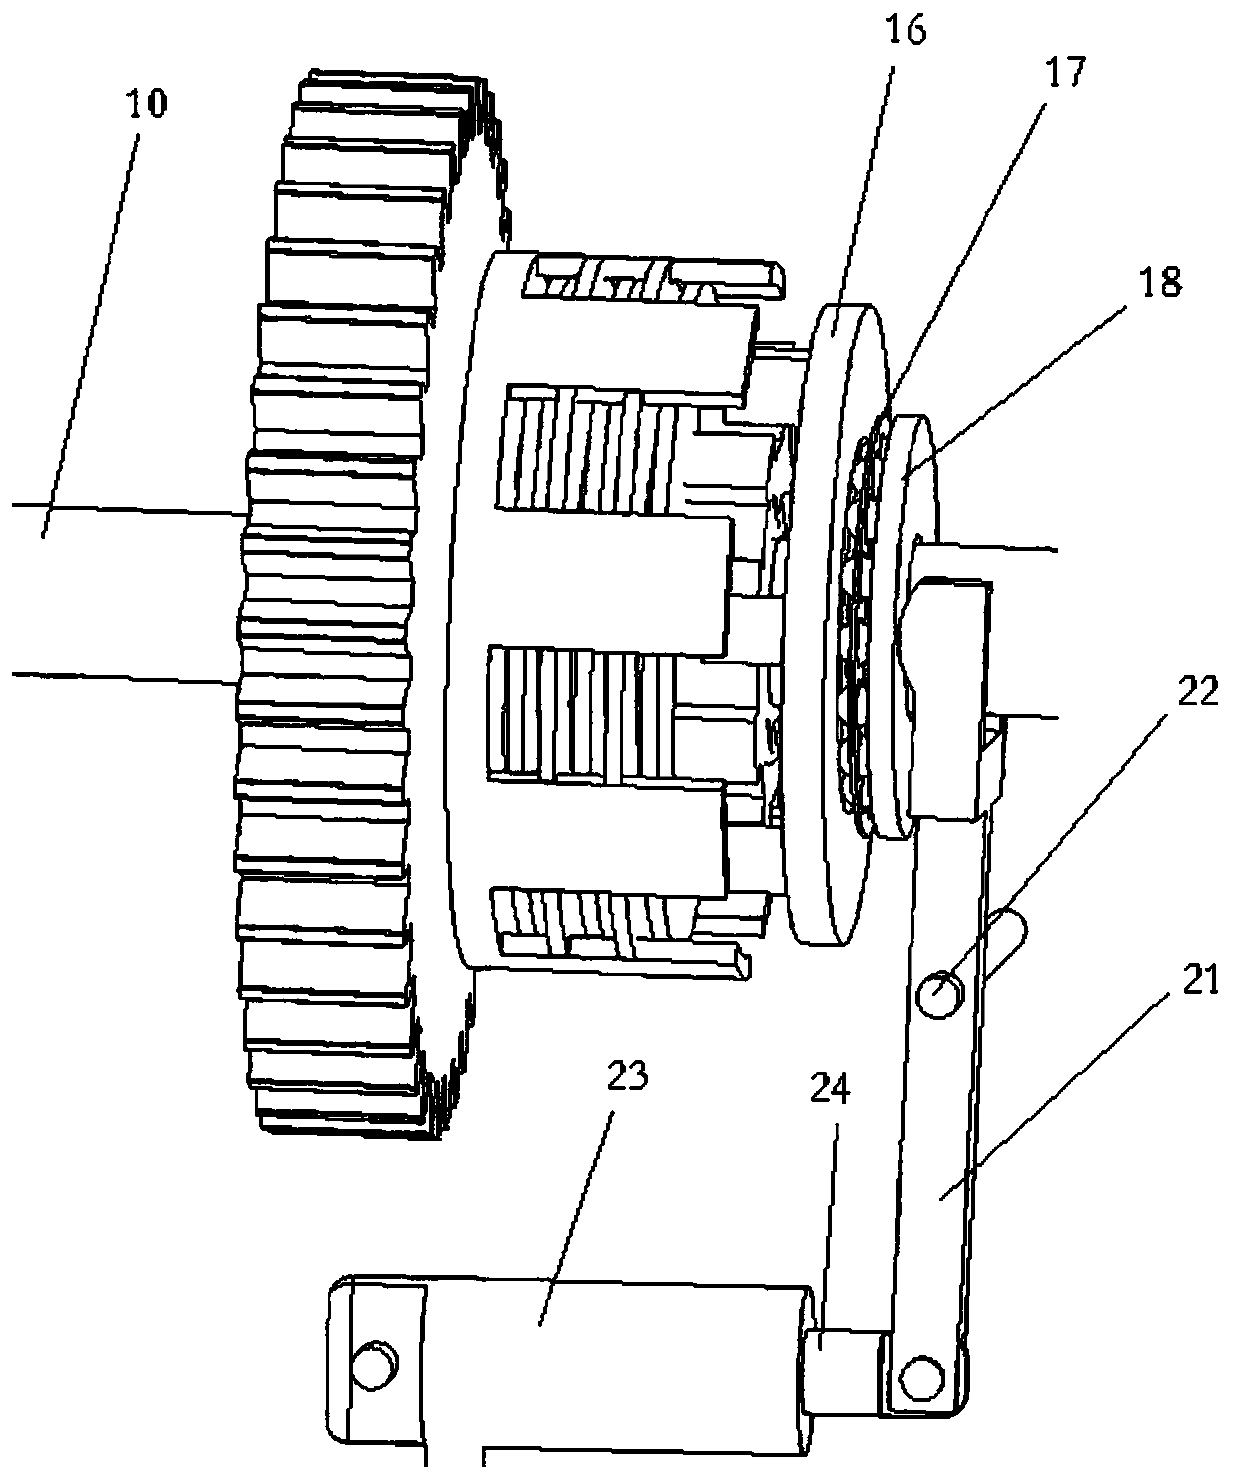 Lever-controlled clutch and speed change device